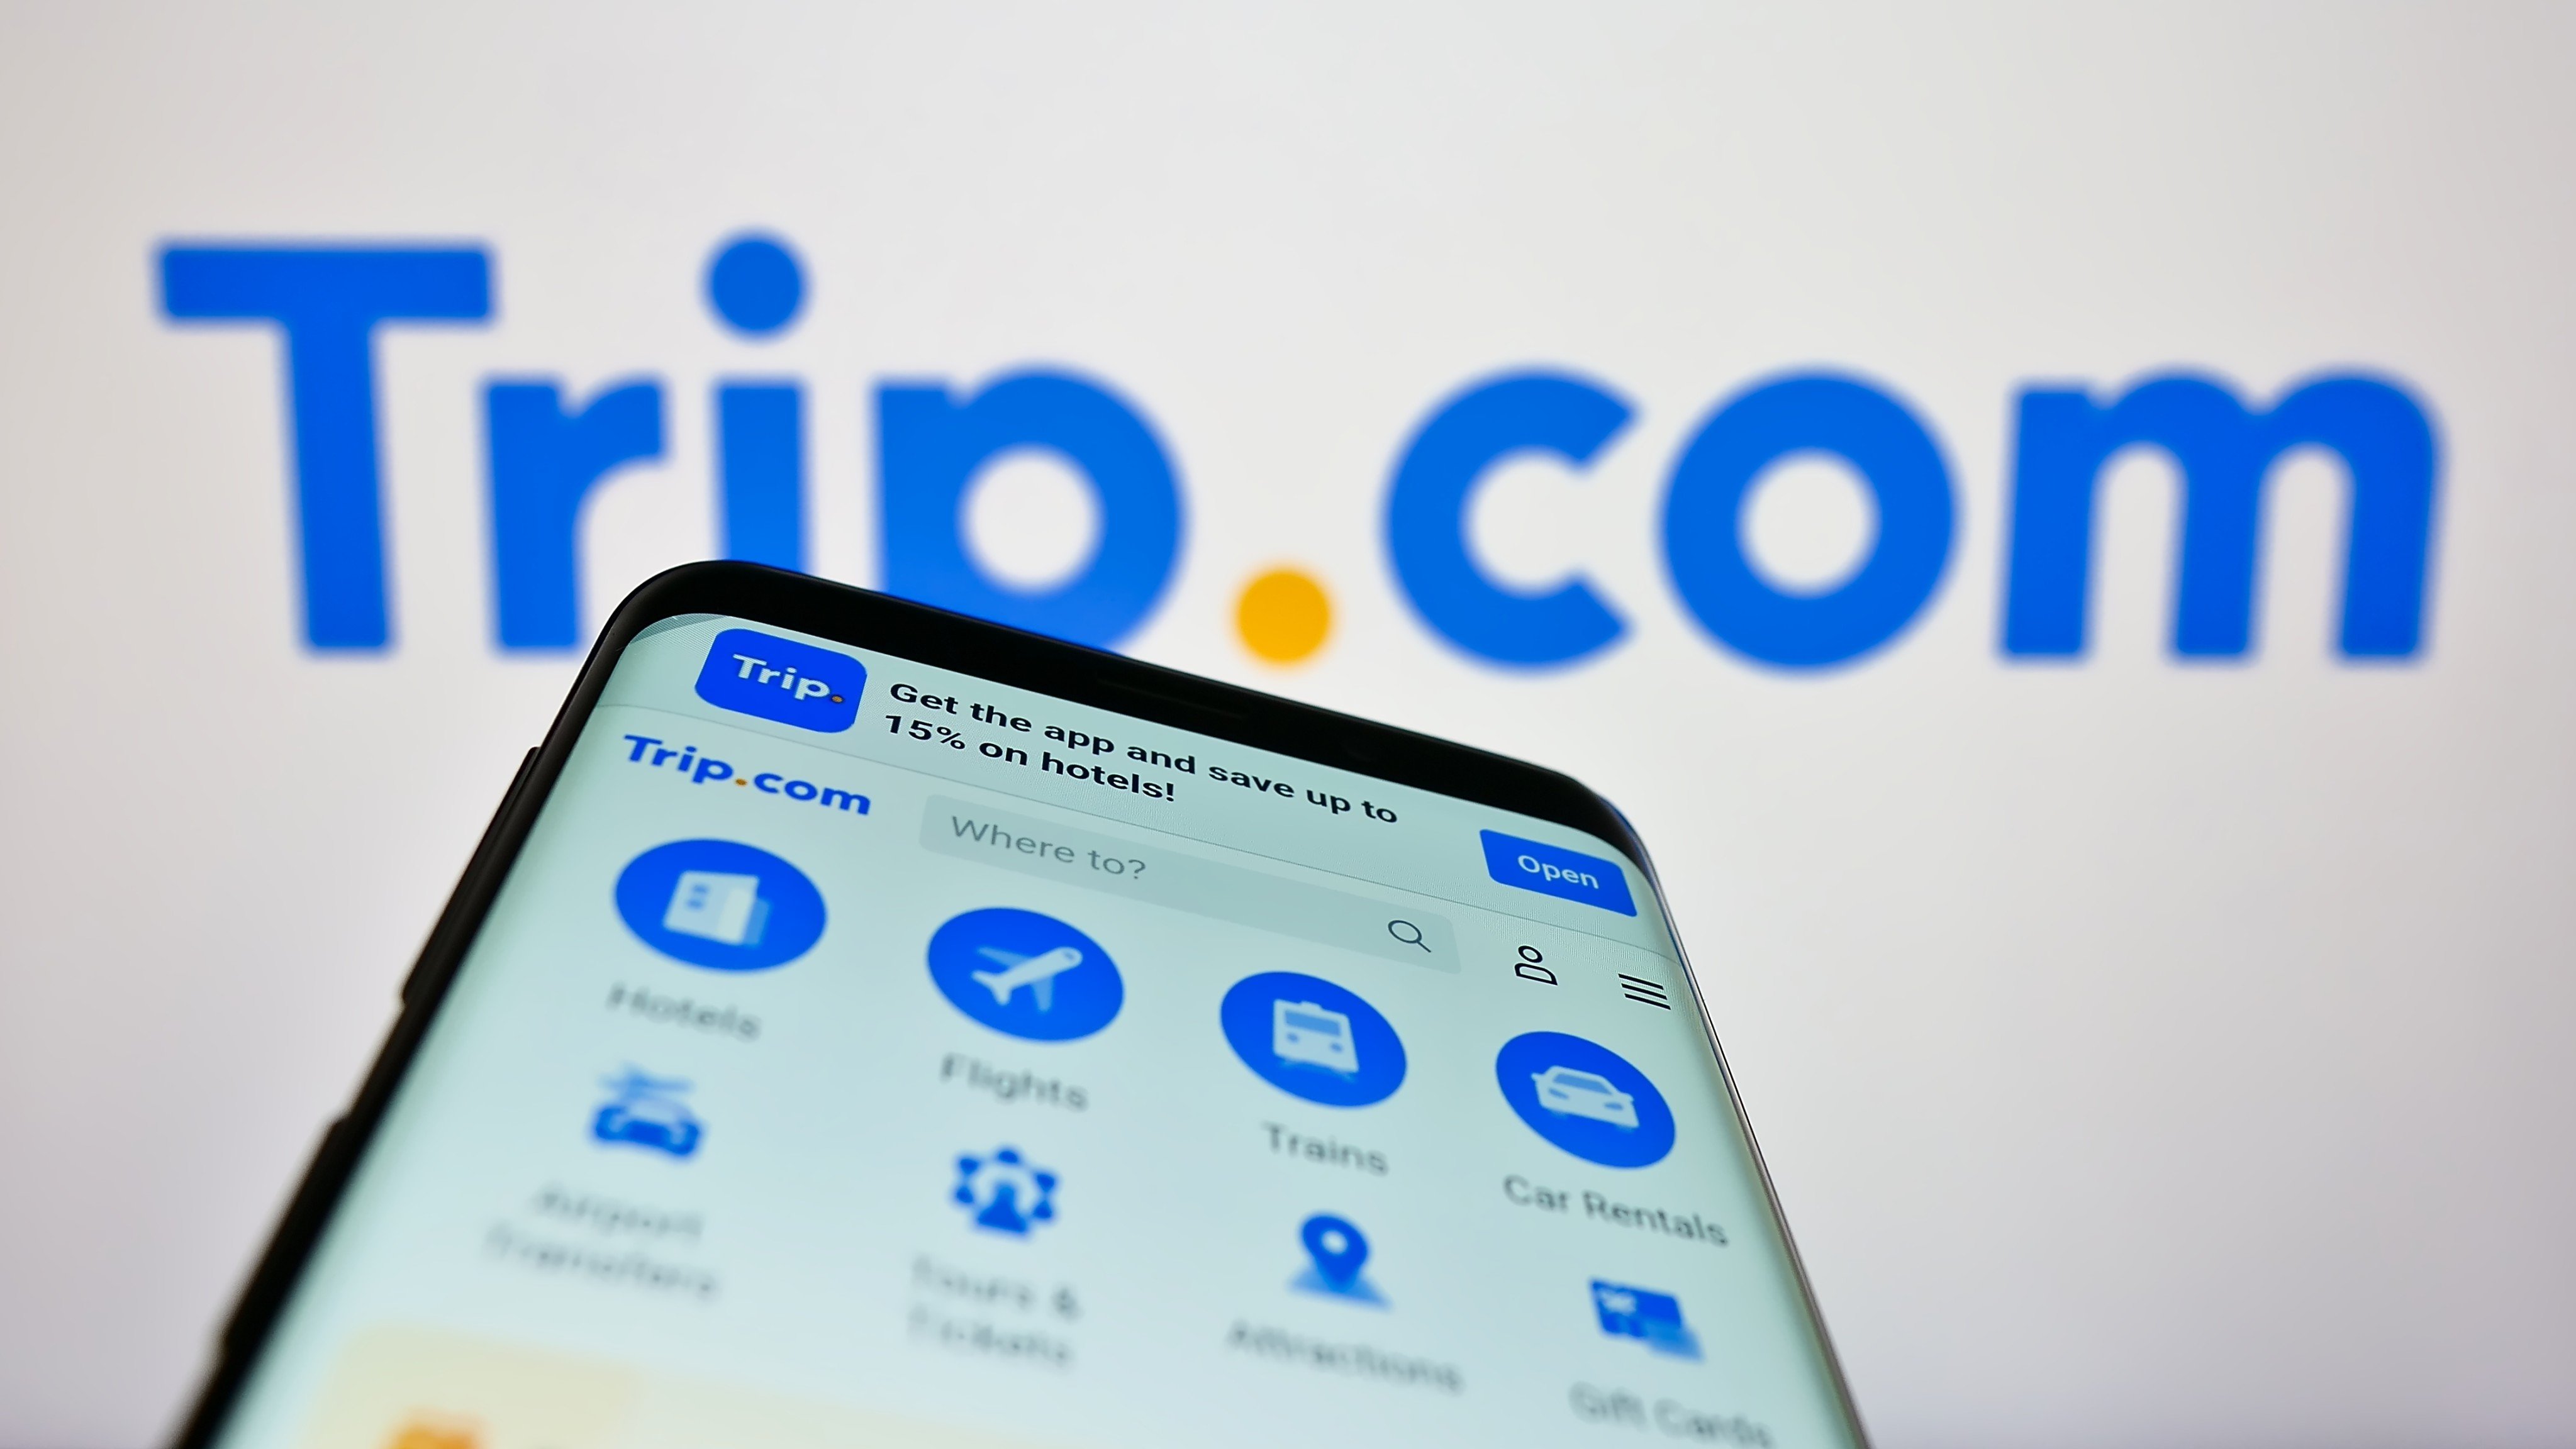 Trip.com’s earnings were boosted by China’s reopening that led to increasing travel demand throughout the year. Photo: Shutterstock